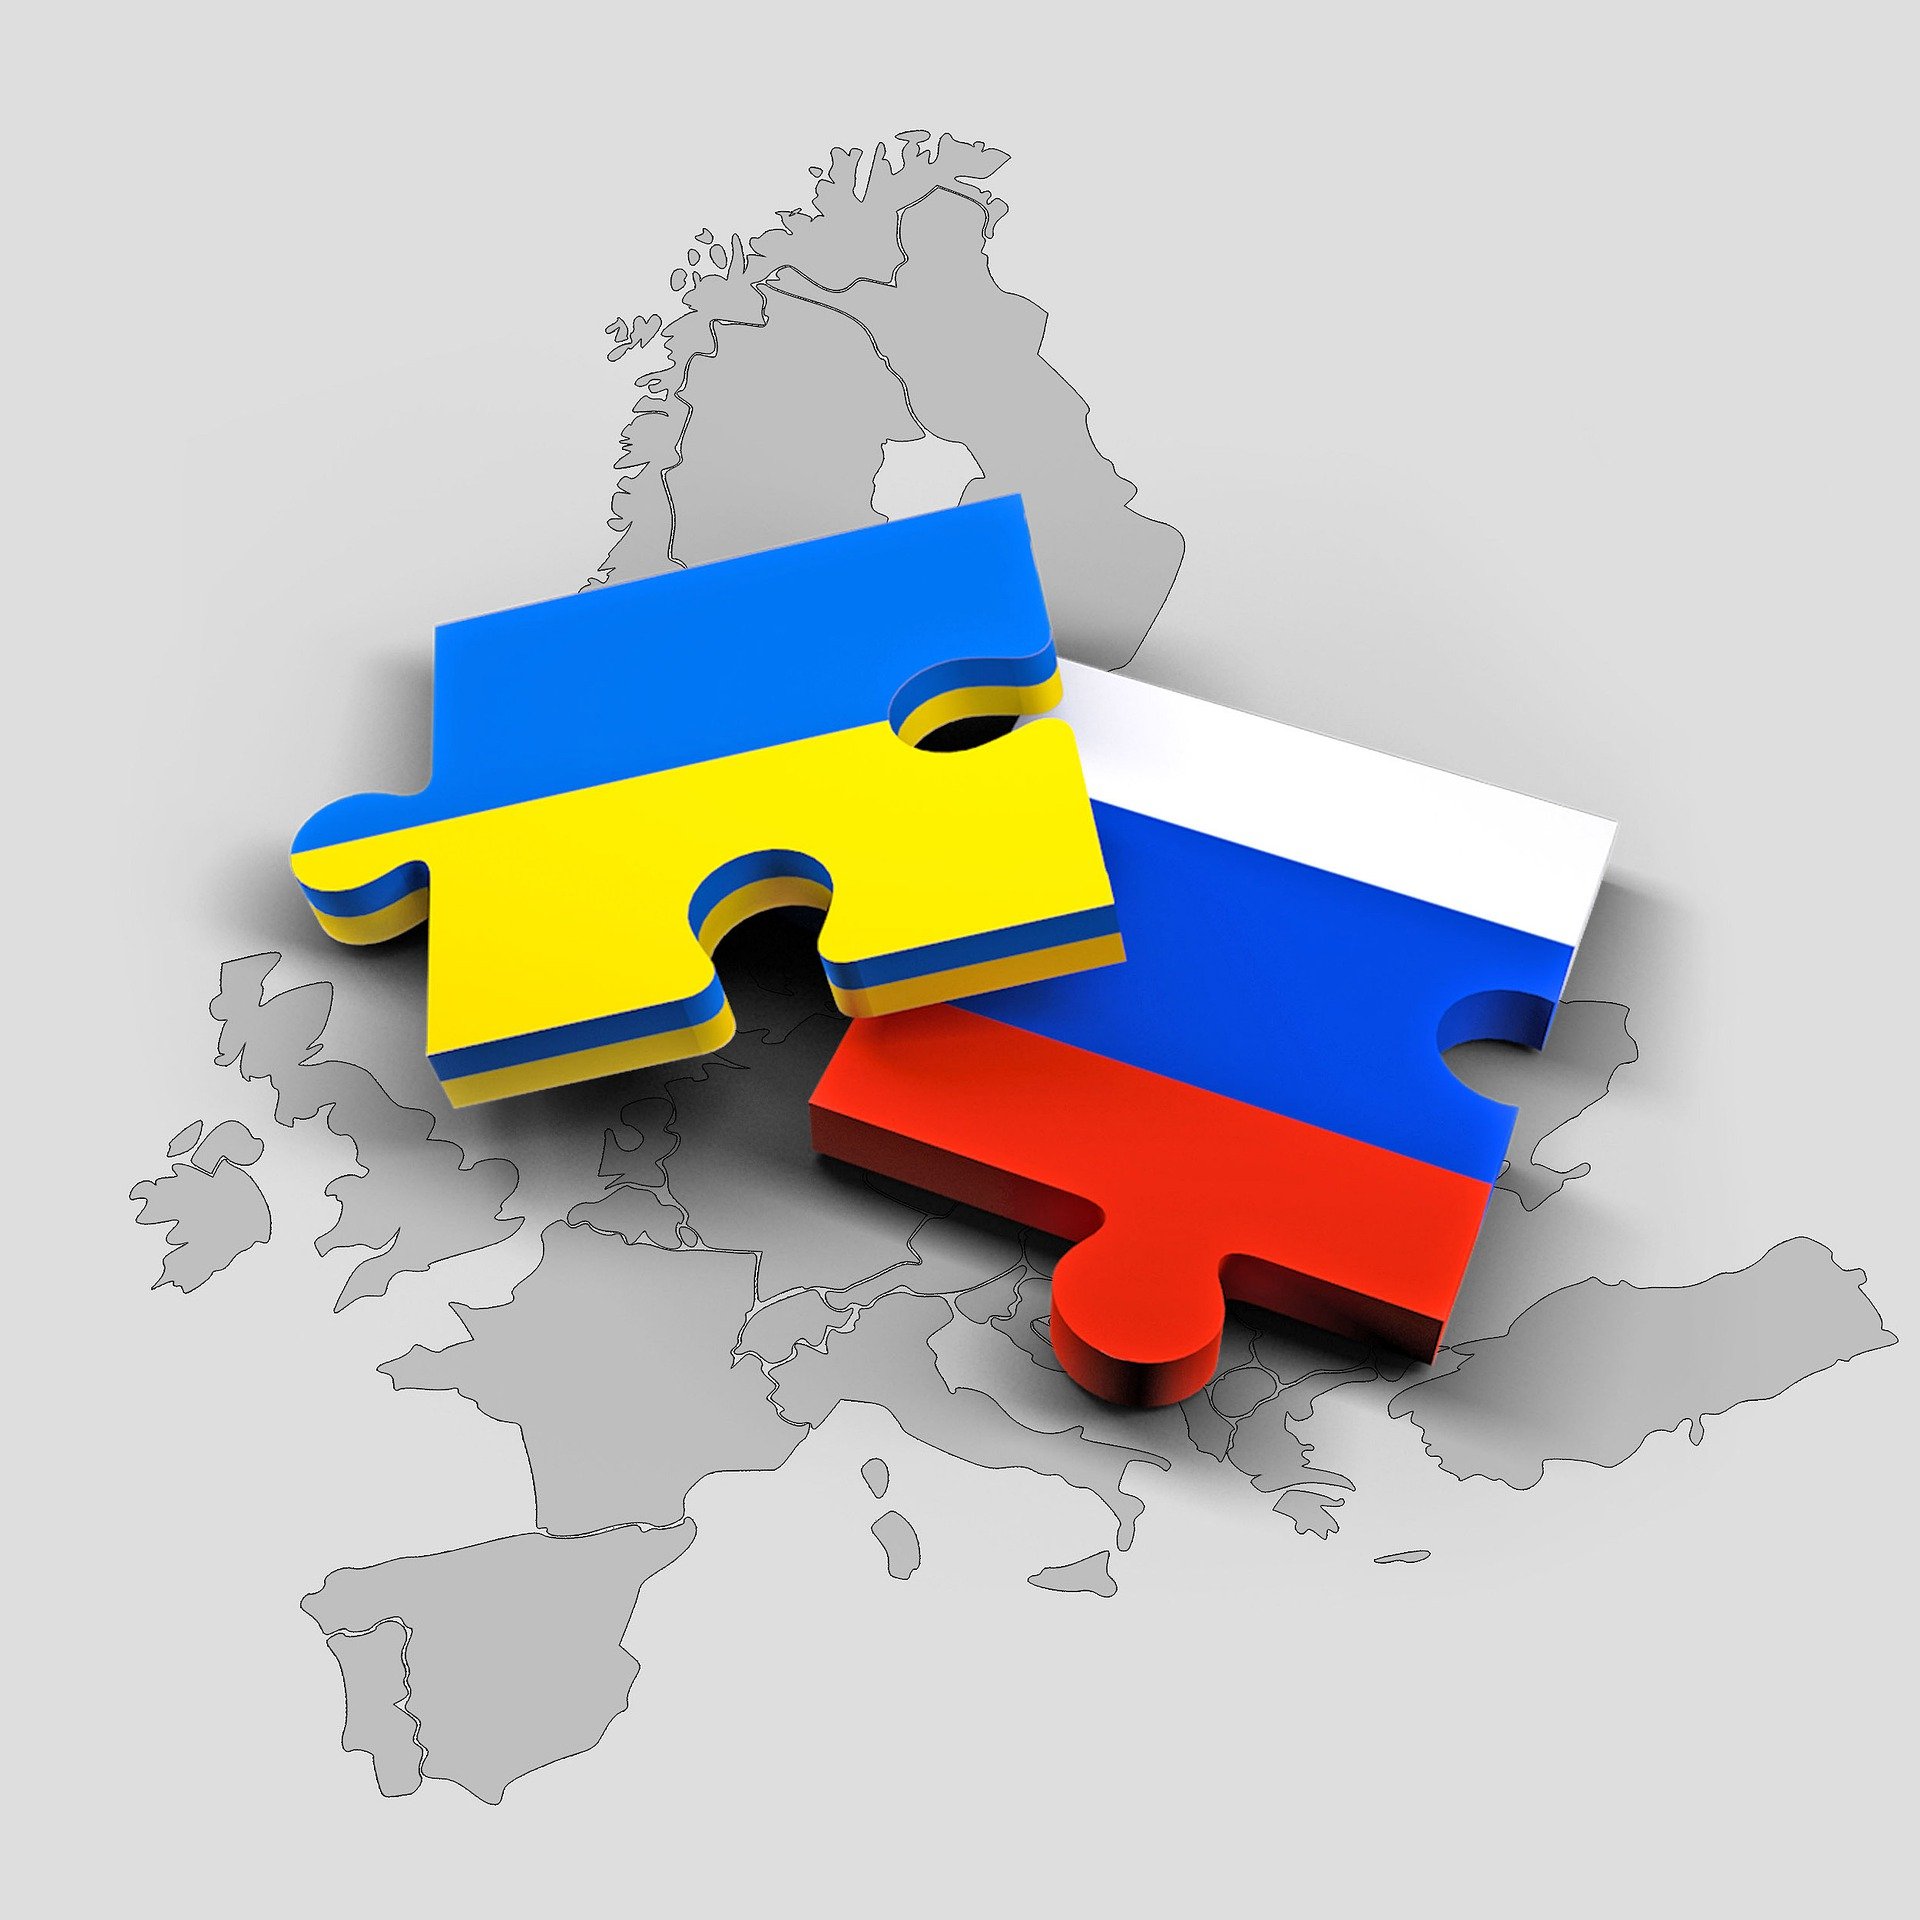 Puzzle pieces with Ukraine and Russian flags over a map